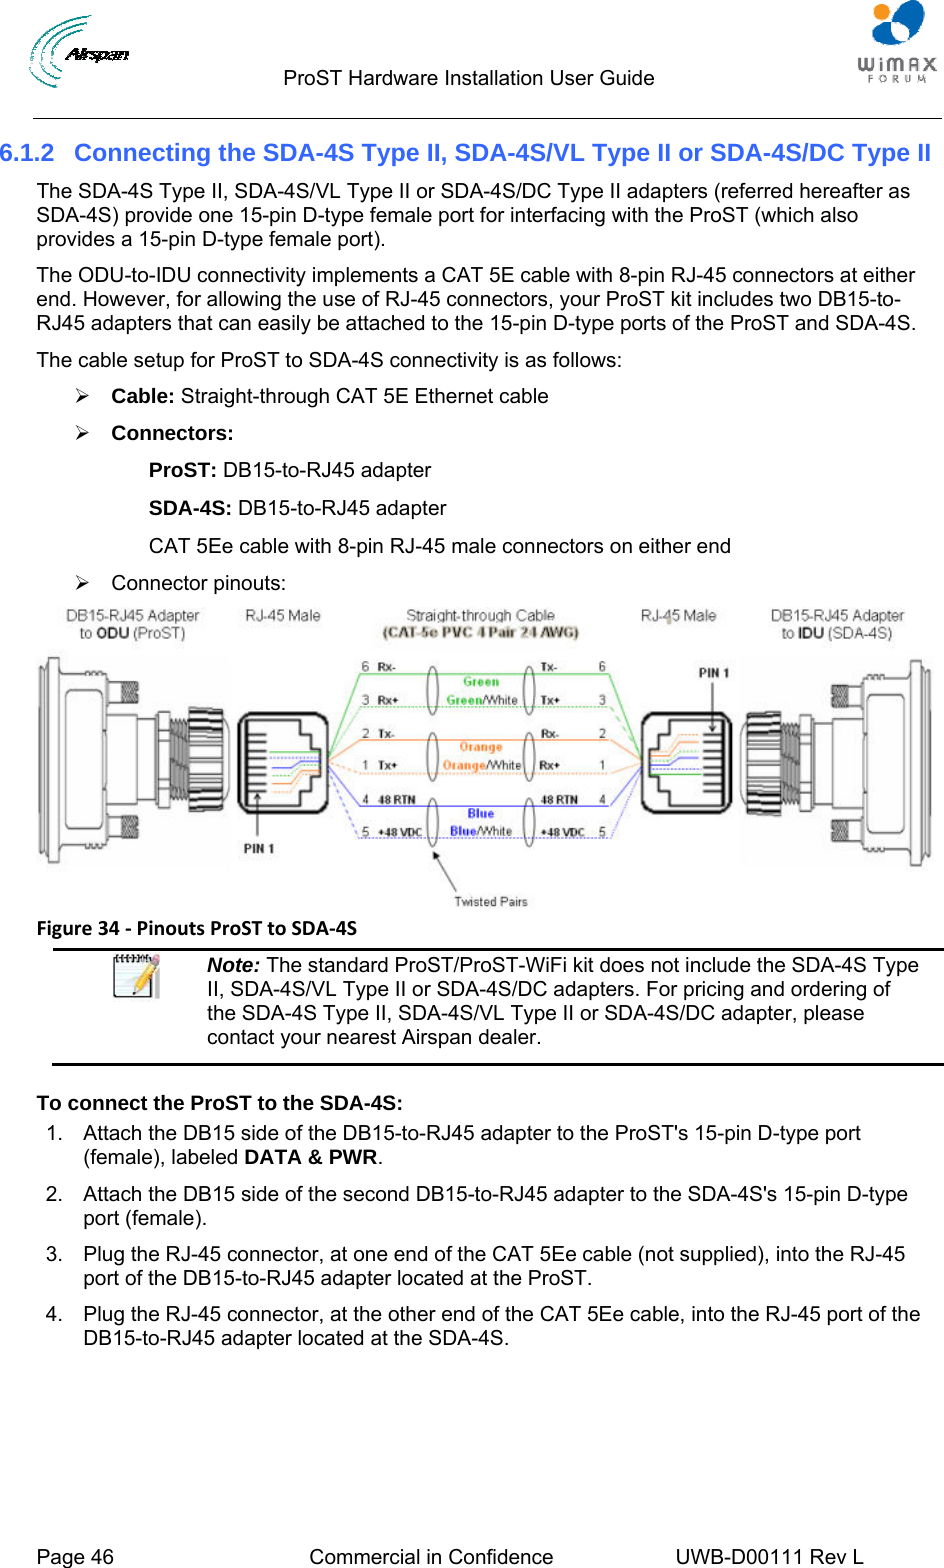                                  ProST Hardware Installation User Guide  Page 46  Commercial in Confidence  UWB-D00111 Rev L   6.1.2  Connecting the SDA-4S Type II, SDA-4S/VL Type II or SDA-4S/DC Type II The SDA-4S Type II, SDA-4S/VL Type II or SDA-4S/DC Type II adapters (referred hereafter as SDA-4S) provide one 15-pin D-type female port for interfacing with the ProST (which also provides a 15-pin D-type female port).  The ODU-to-IDU connectivity implements a CAT 5E cable with 8-pin RJ-45 connectors at either end. However, for allowing the use of RJ-45 connectors, your ProST kit includes two DB15-to-RJ45 adapters that can easily be attached to the 15-pin D-type ports of the ProST and SDA-4S. The cable setup for ProST to SDA-4S connectivity is as follows: ¾ Cable: Straight-through CAT 5E Ethernet cable ¾ Connectors:    ProST: DB15-to-RJ45 adapter   SDA-4S: DB15-to-RJ45 adapter    CAT 5Ee cable with 8-pin RJ-45 male connectors on either end ¾ Connector pinouts:  Figure34‐PinoutsProSTtoSDA‐4S Note: The standard ProST/ProST-WiFi kit does not include the SDA-4S Type II, SDA-4S/VL Type II or SDA-4S/DC adapters. For pricing and ordering of the SDA-4S Type II, SDA-4S/VL Type II or SDA-4S/DC adapter, please contact your nearest Airspan dealer.  To connect the ProST to the SDA-4S: 1.  Attach the DB15 side of the DB15-to-RJ45 adapter to the ProST&apos;s 15-pin D-type port (female), labeled DATA &amp; PWR. 2.  Attach the DB15 side of the second DB15-to-RJ45 adapter to the SDA-4S&apos;s 15-pin D-type port (female). 3.  Plug the RJ-45 connector, at one end of the CAT 5Ee cable (not supplied), into the RJ-45 port of the DB15-to-RJ45 adapter located at the ProST. 4.  Plug the RJ-45 connector, at the other end of the CAT 5Ee cable, into the RJ-45 port of the DB15-to-RJ45 adapter located at the SDA-4S. 